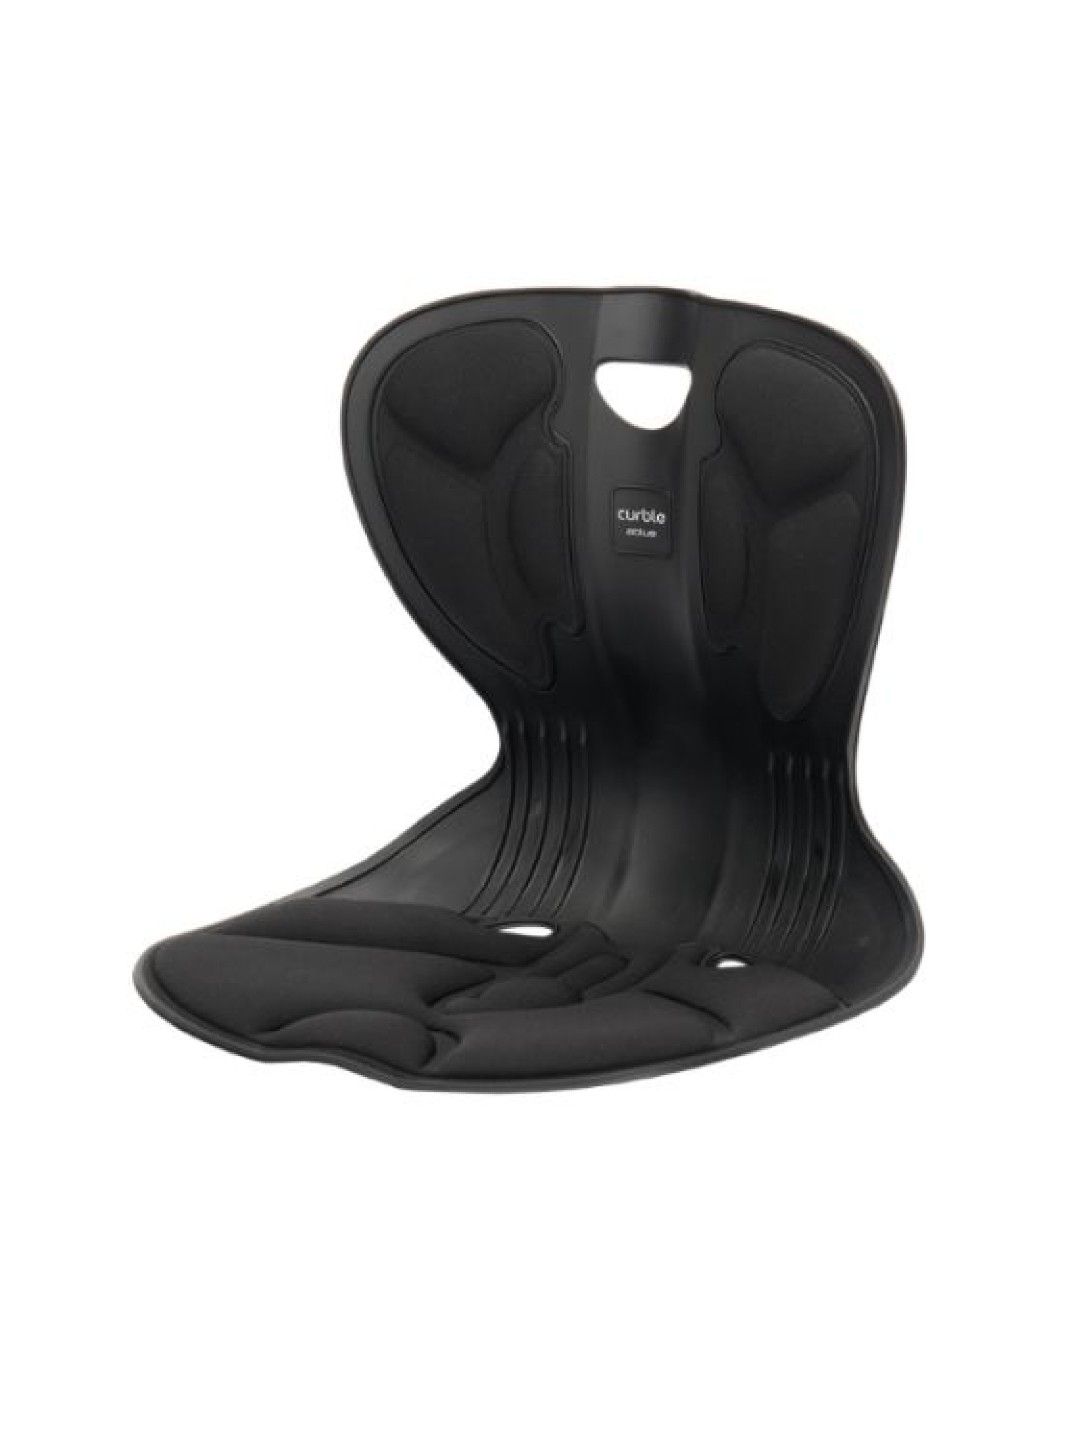 Curble - Posture Corrector Seat Wider Black